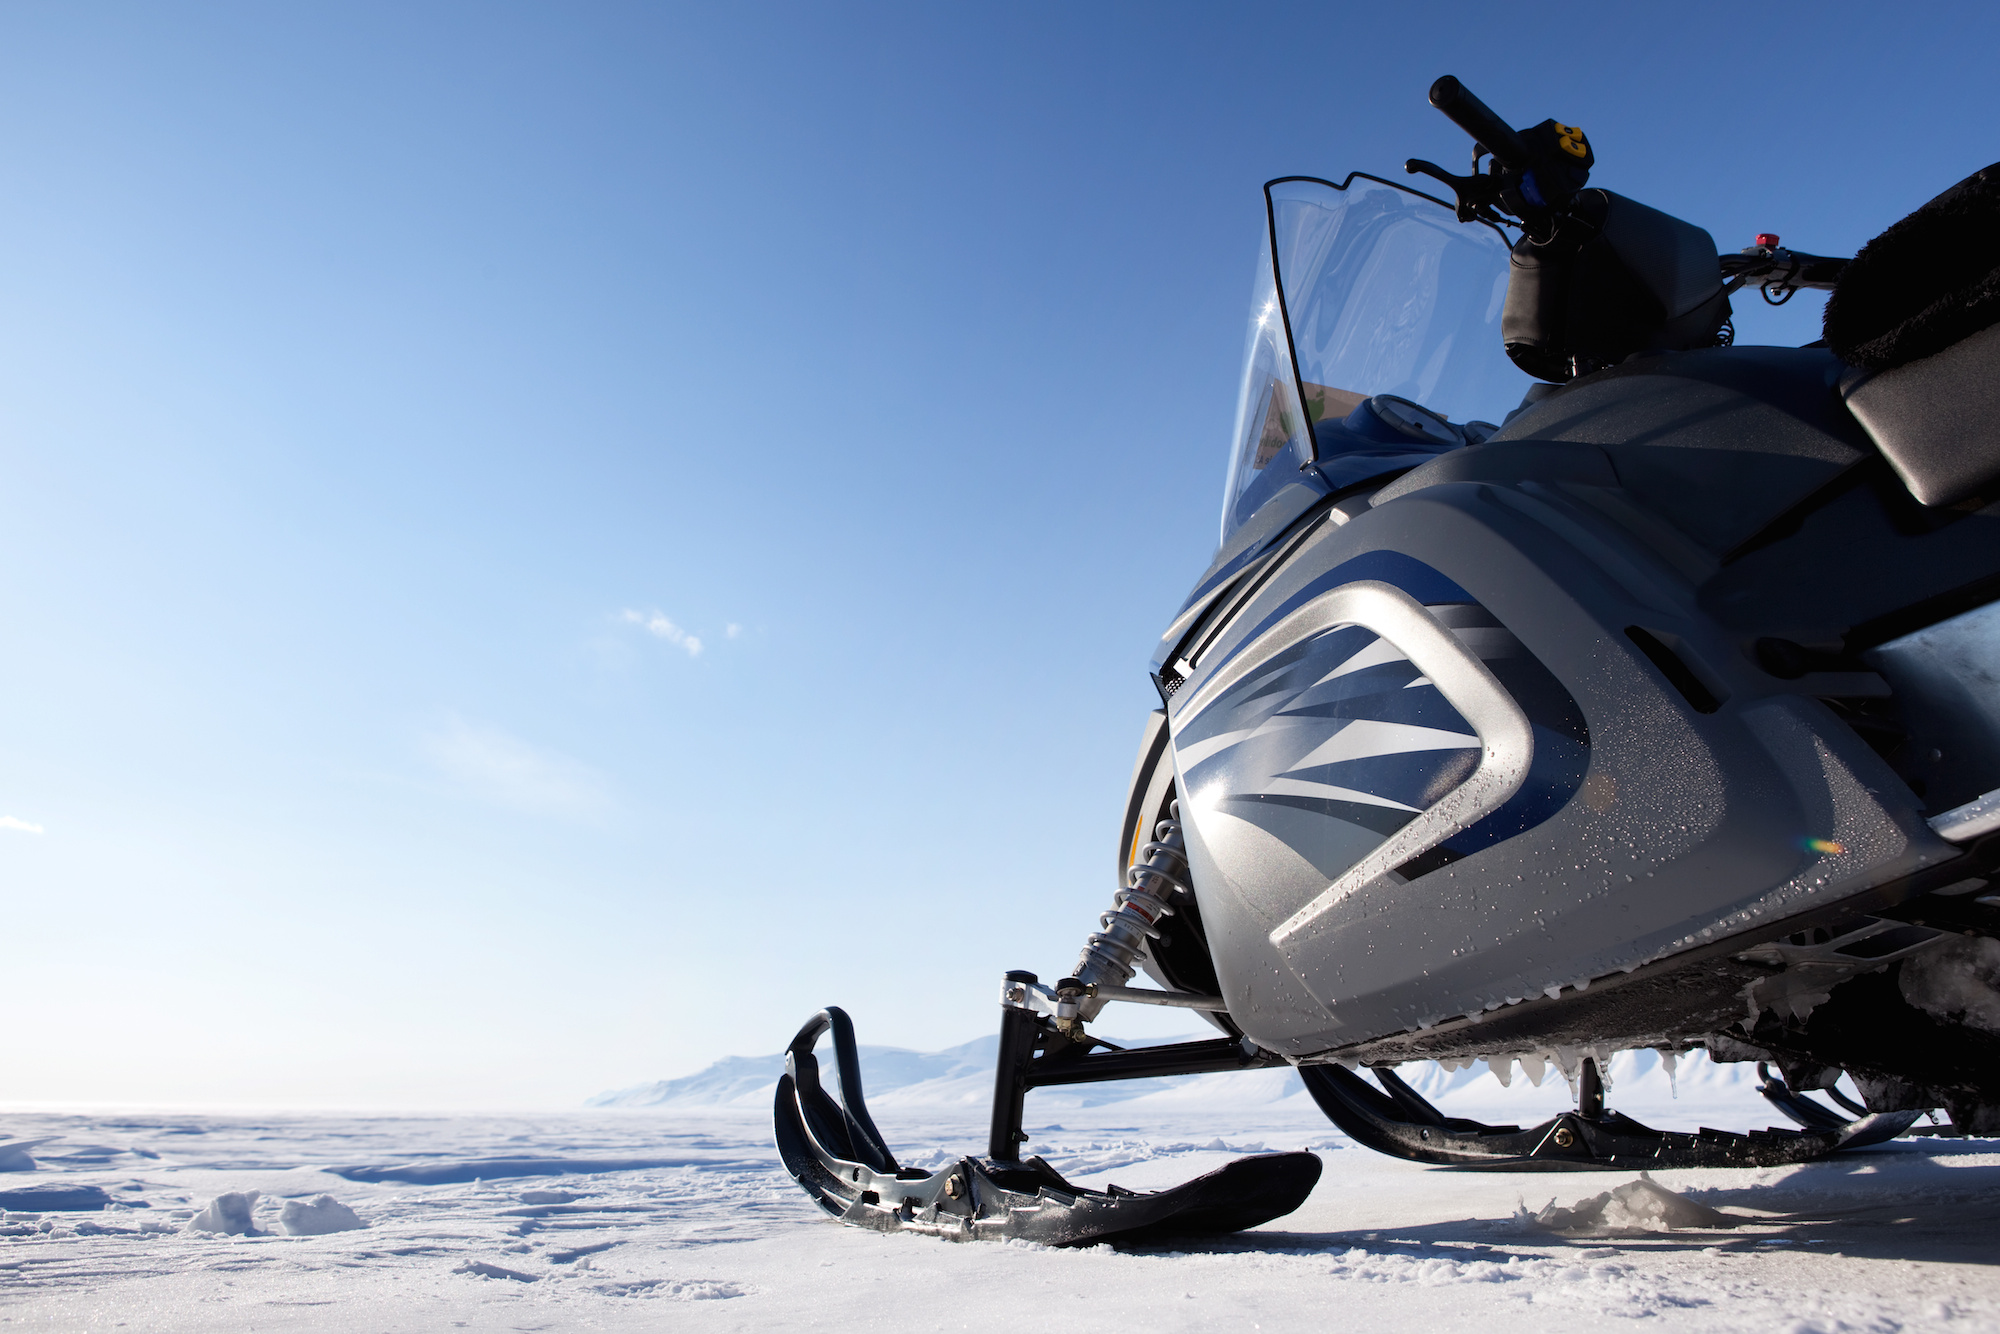 Search warrant in Innisfil leads to charges in snowmobile theft ...